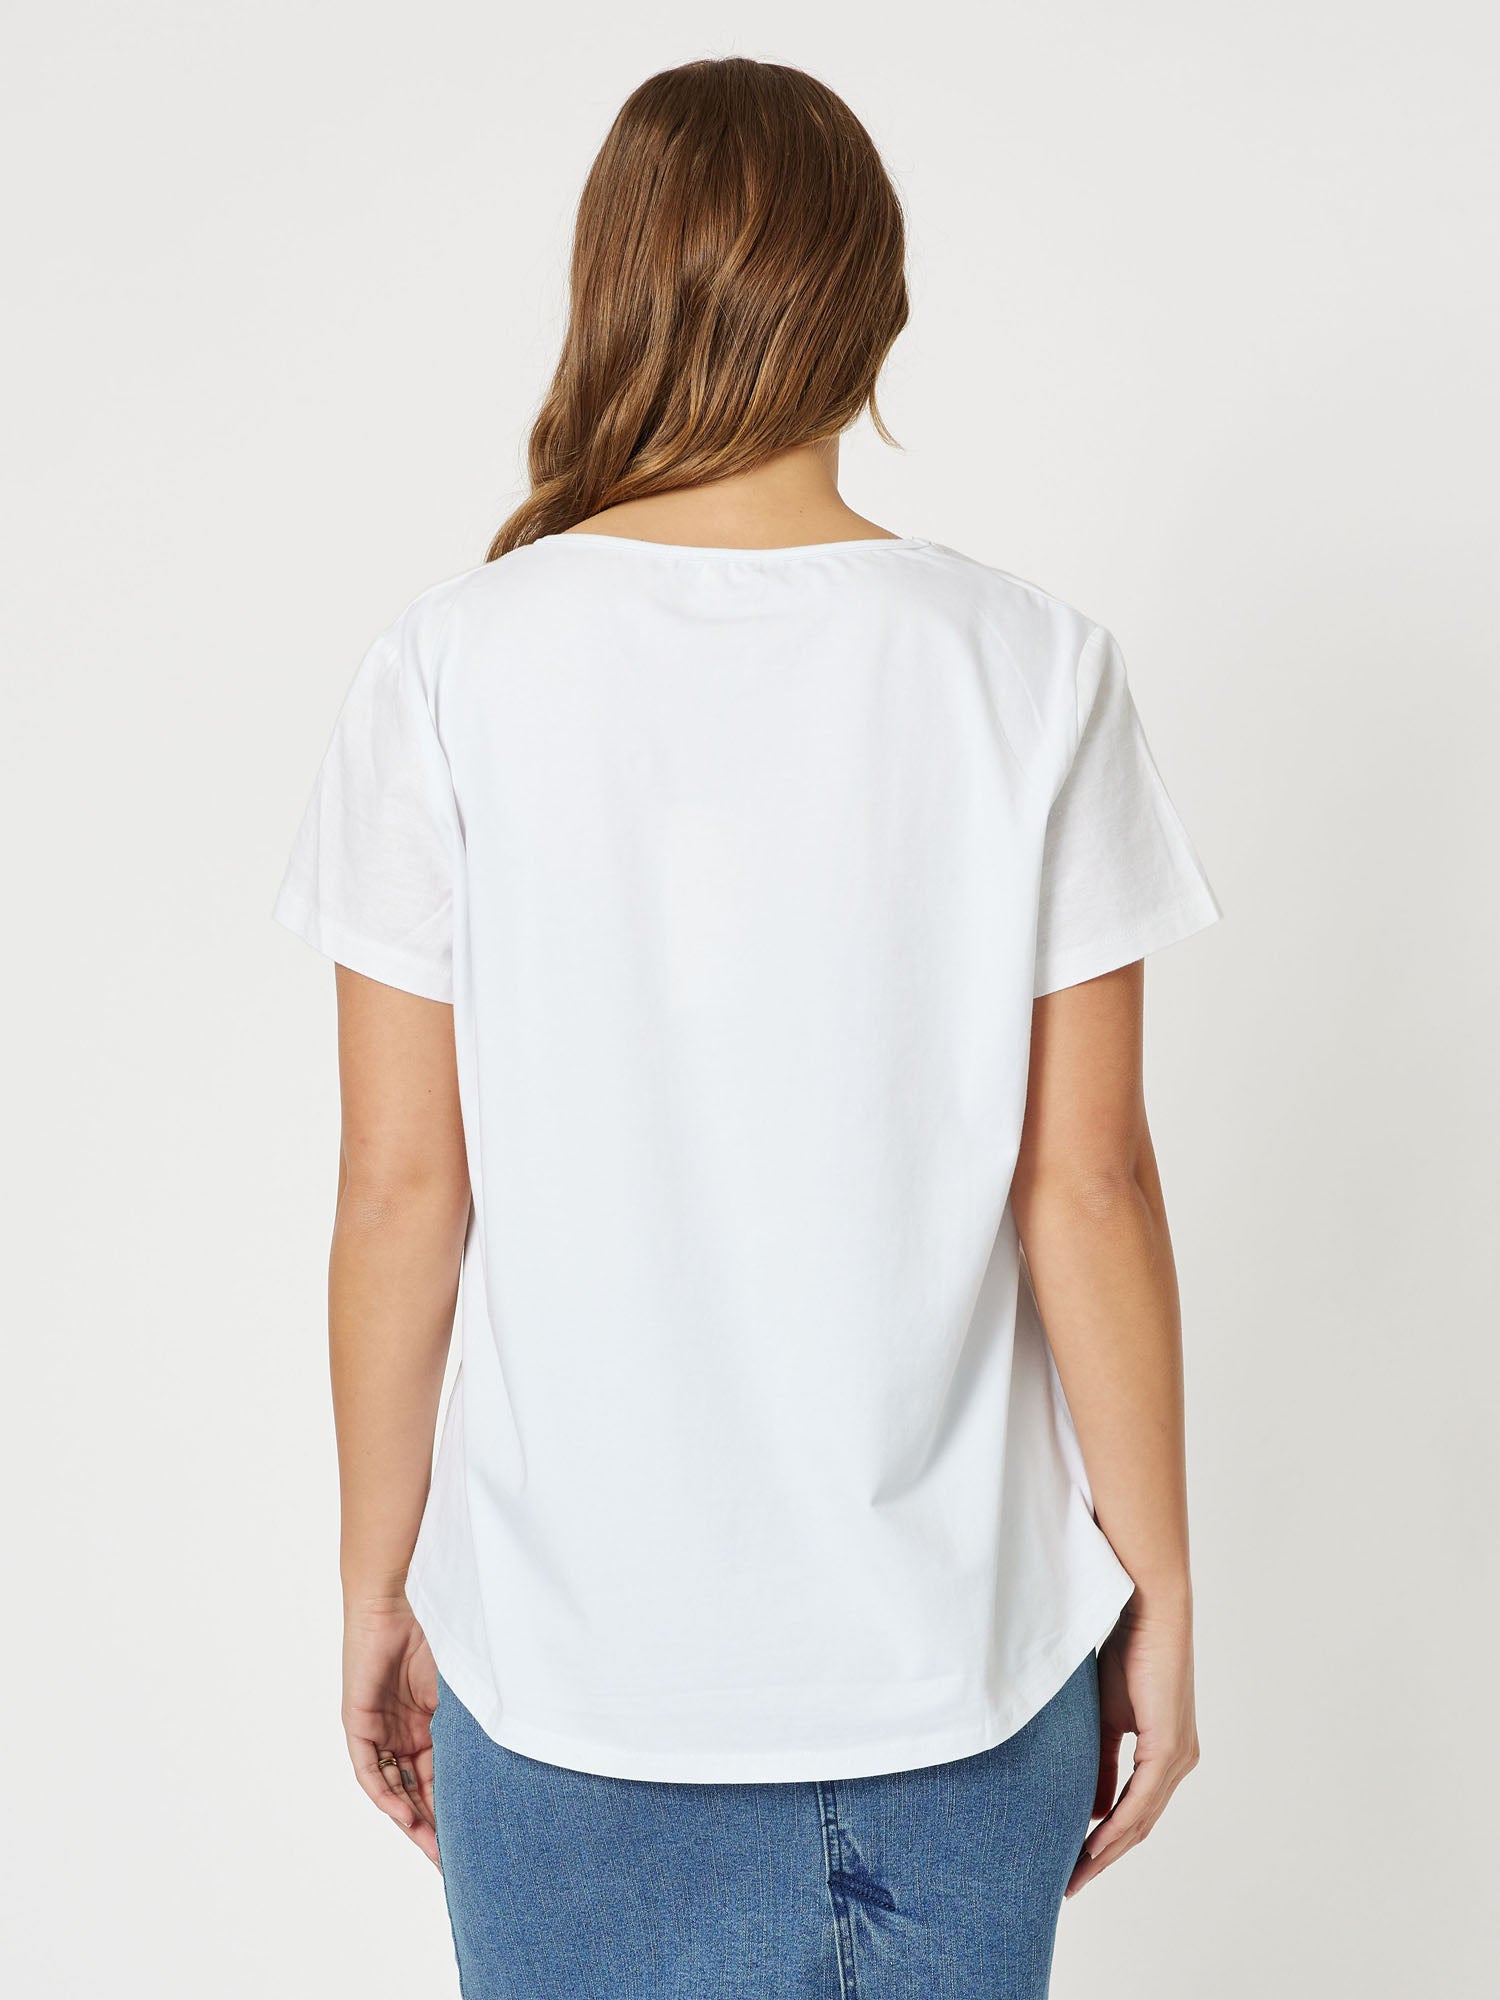 Broderie Lace Heart Front Tee - White